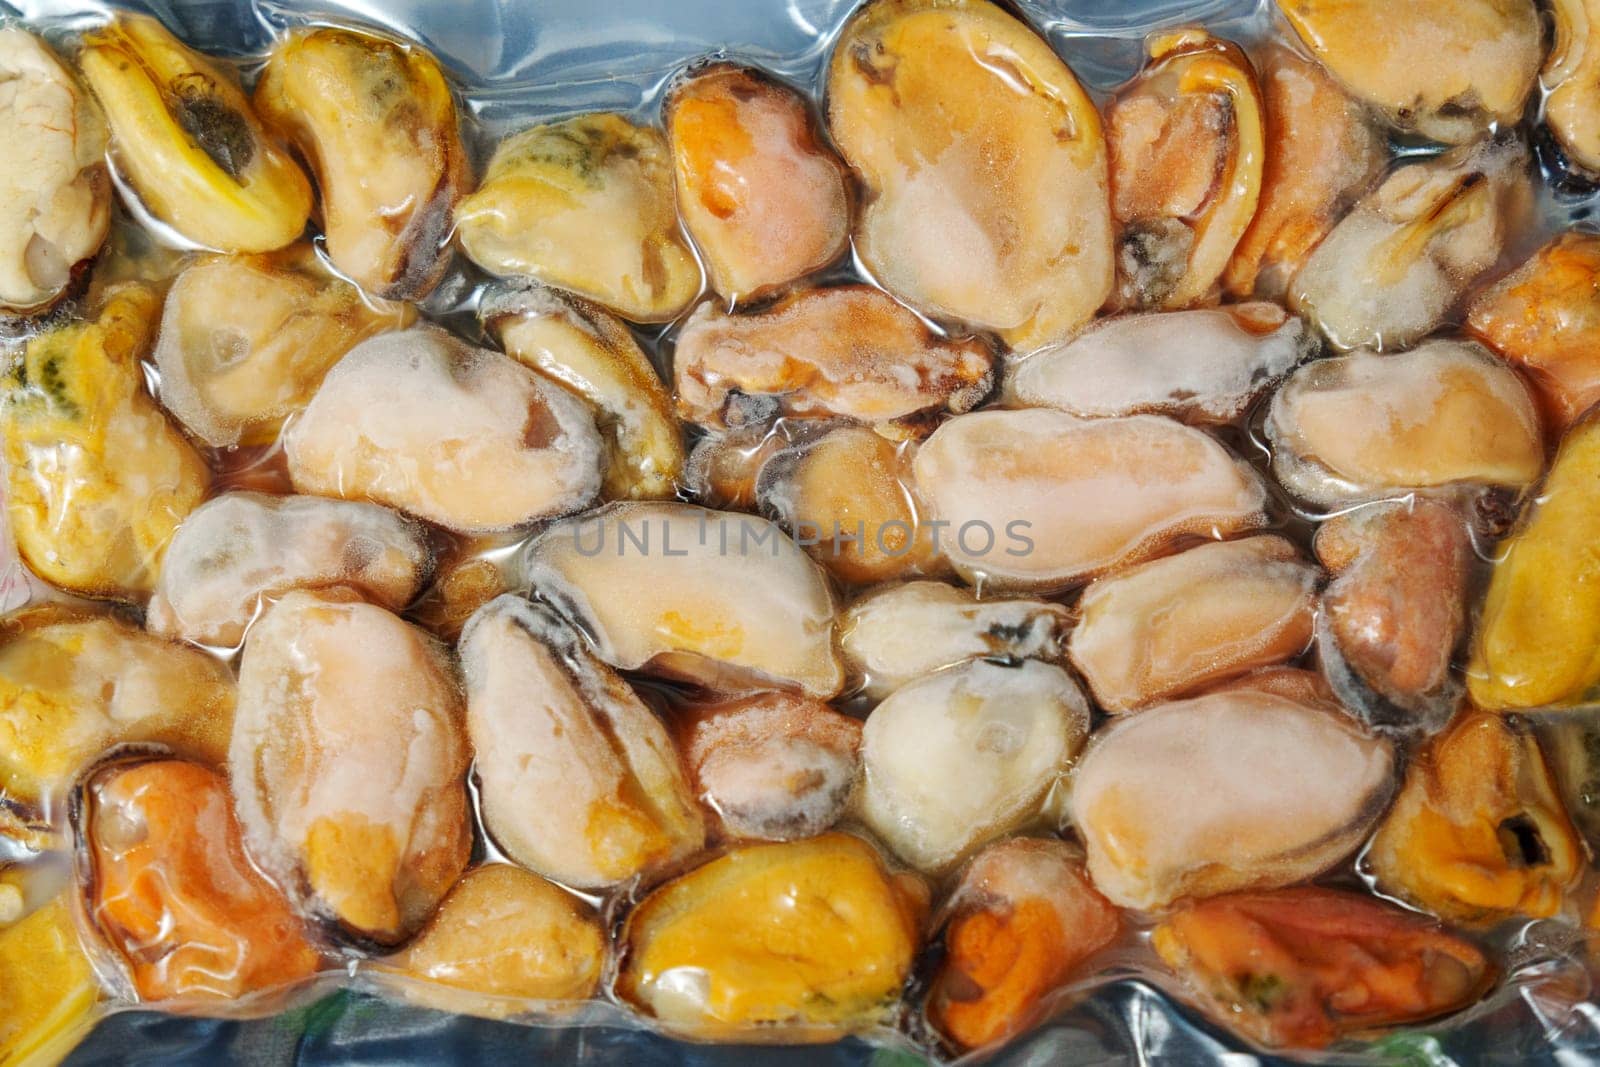 Frozen mussels background. Frozen seafood. Wholesale of fish. Peeled mussels by darksoul72